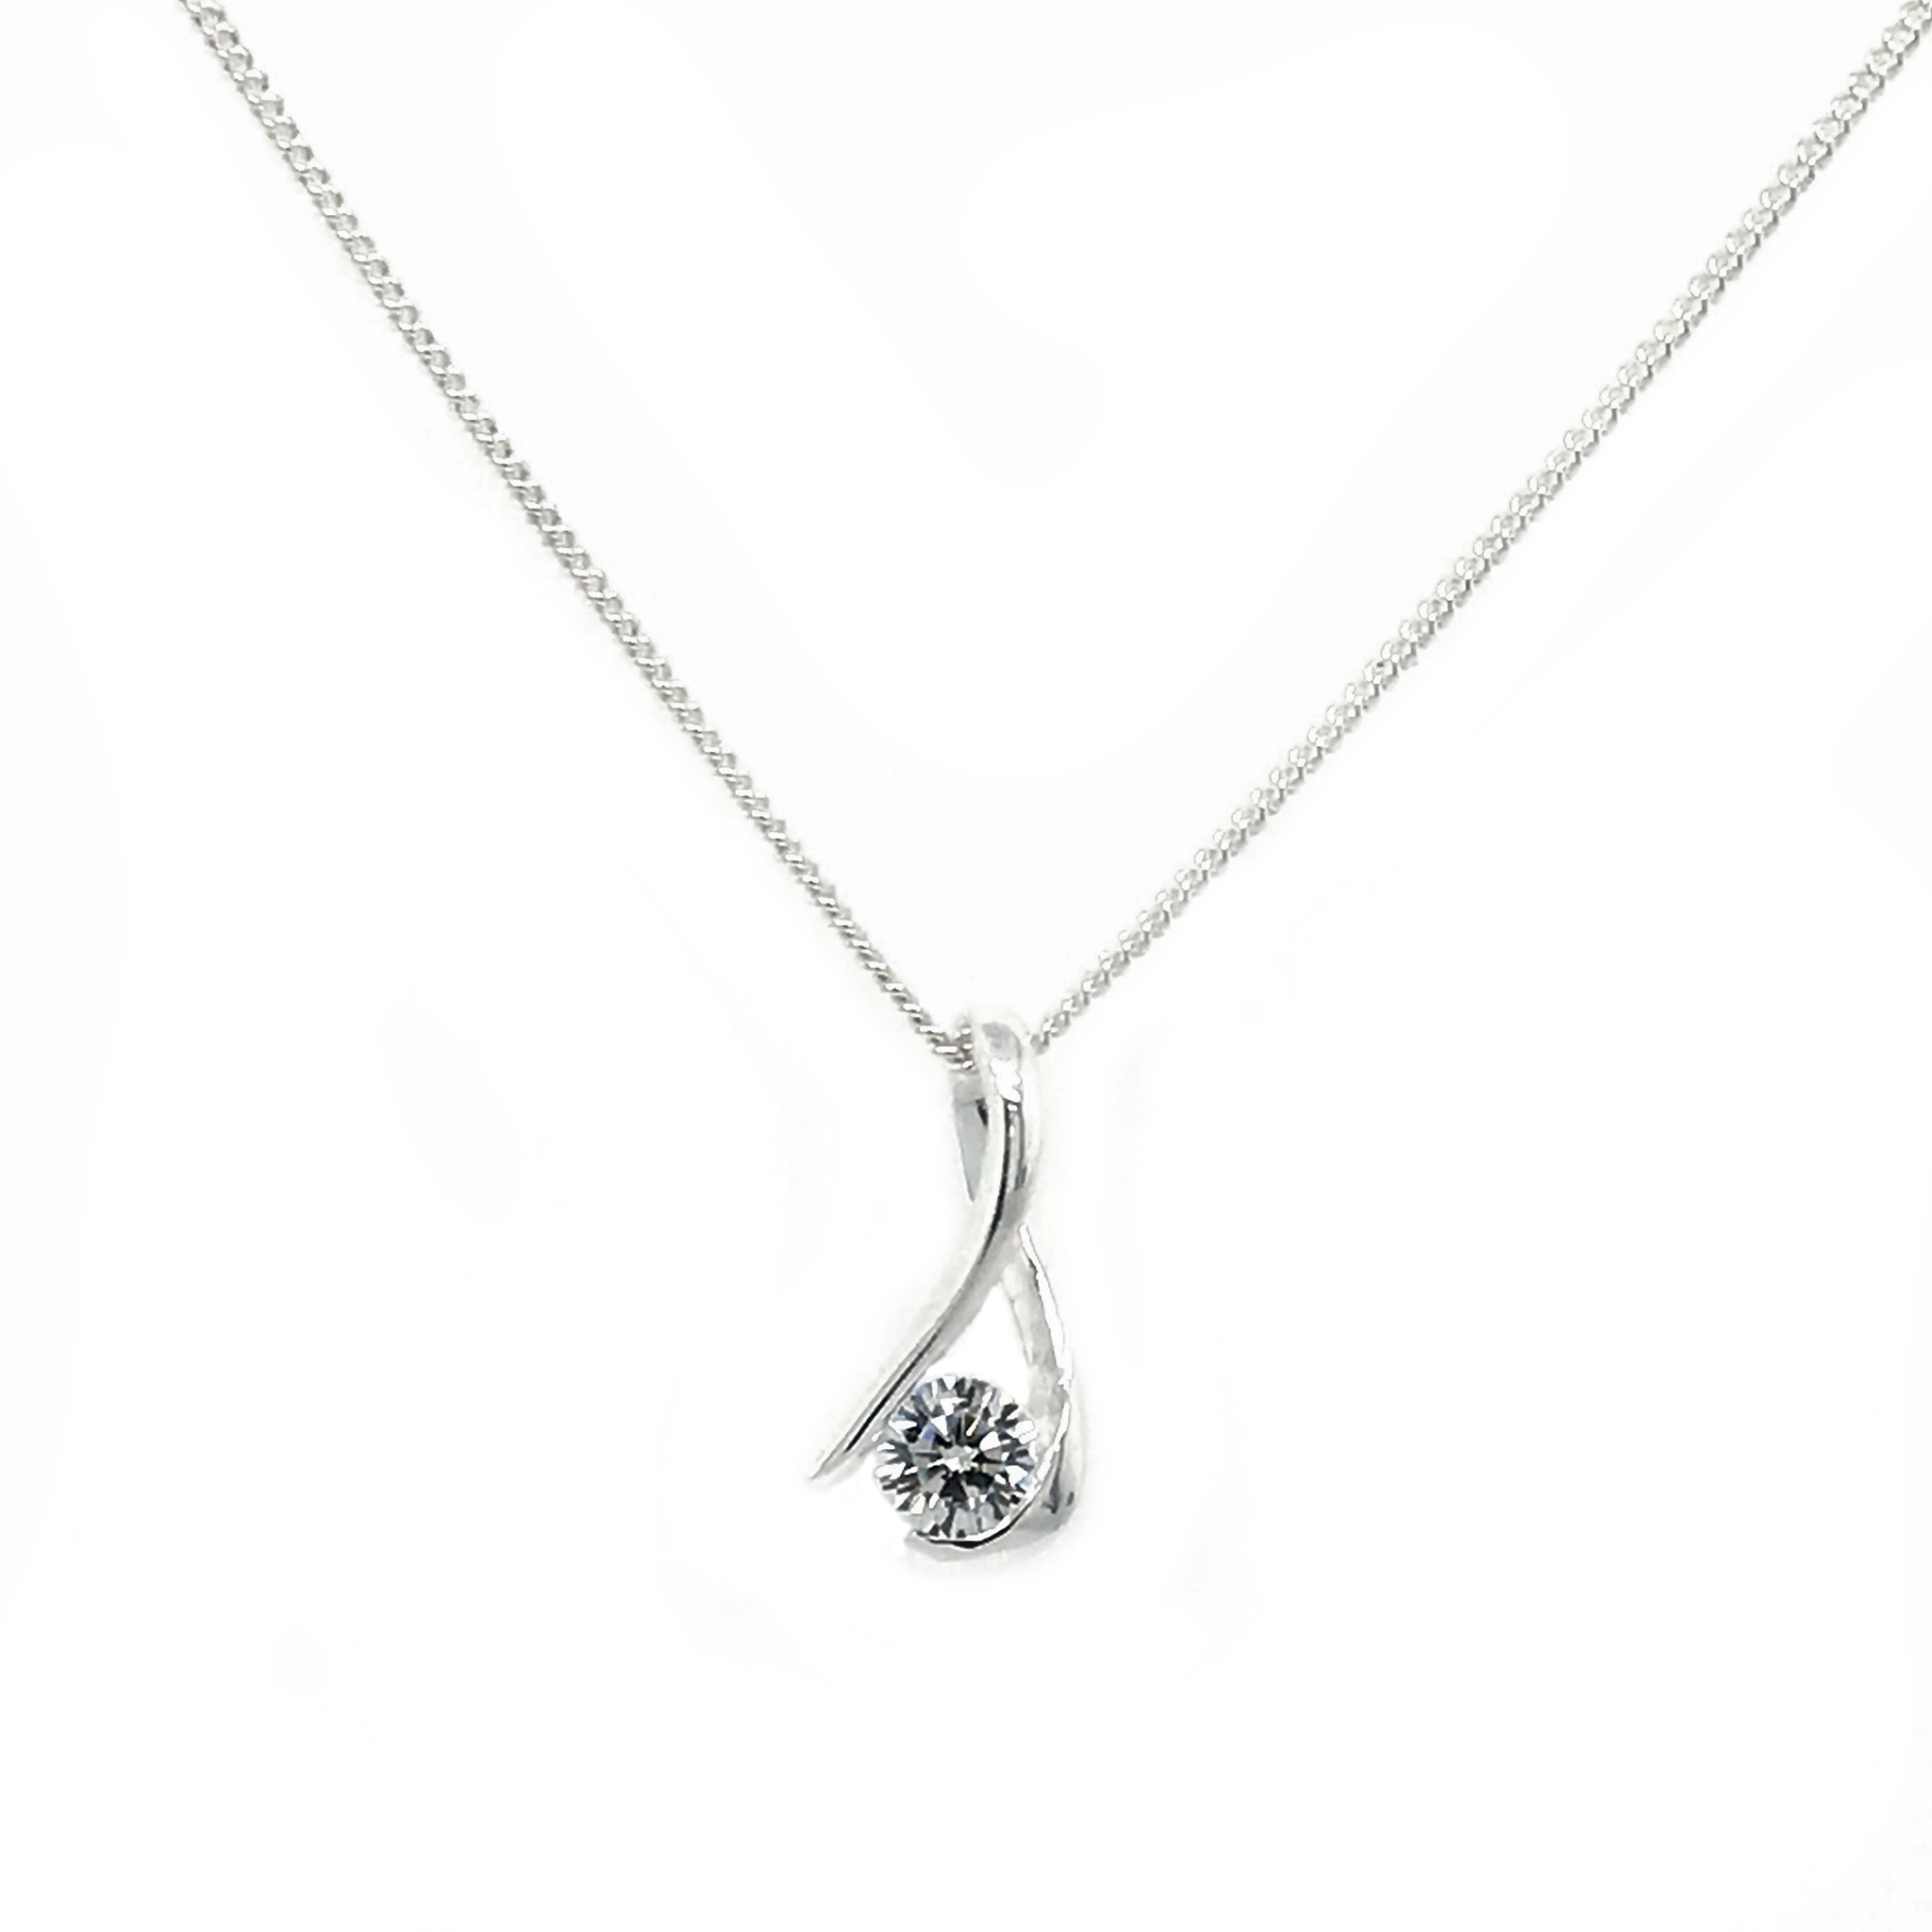 Silver Twist with CZ Pendant on chain